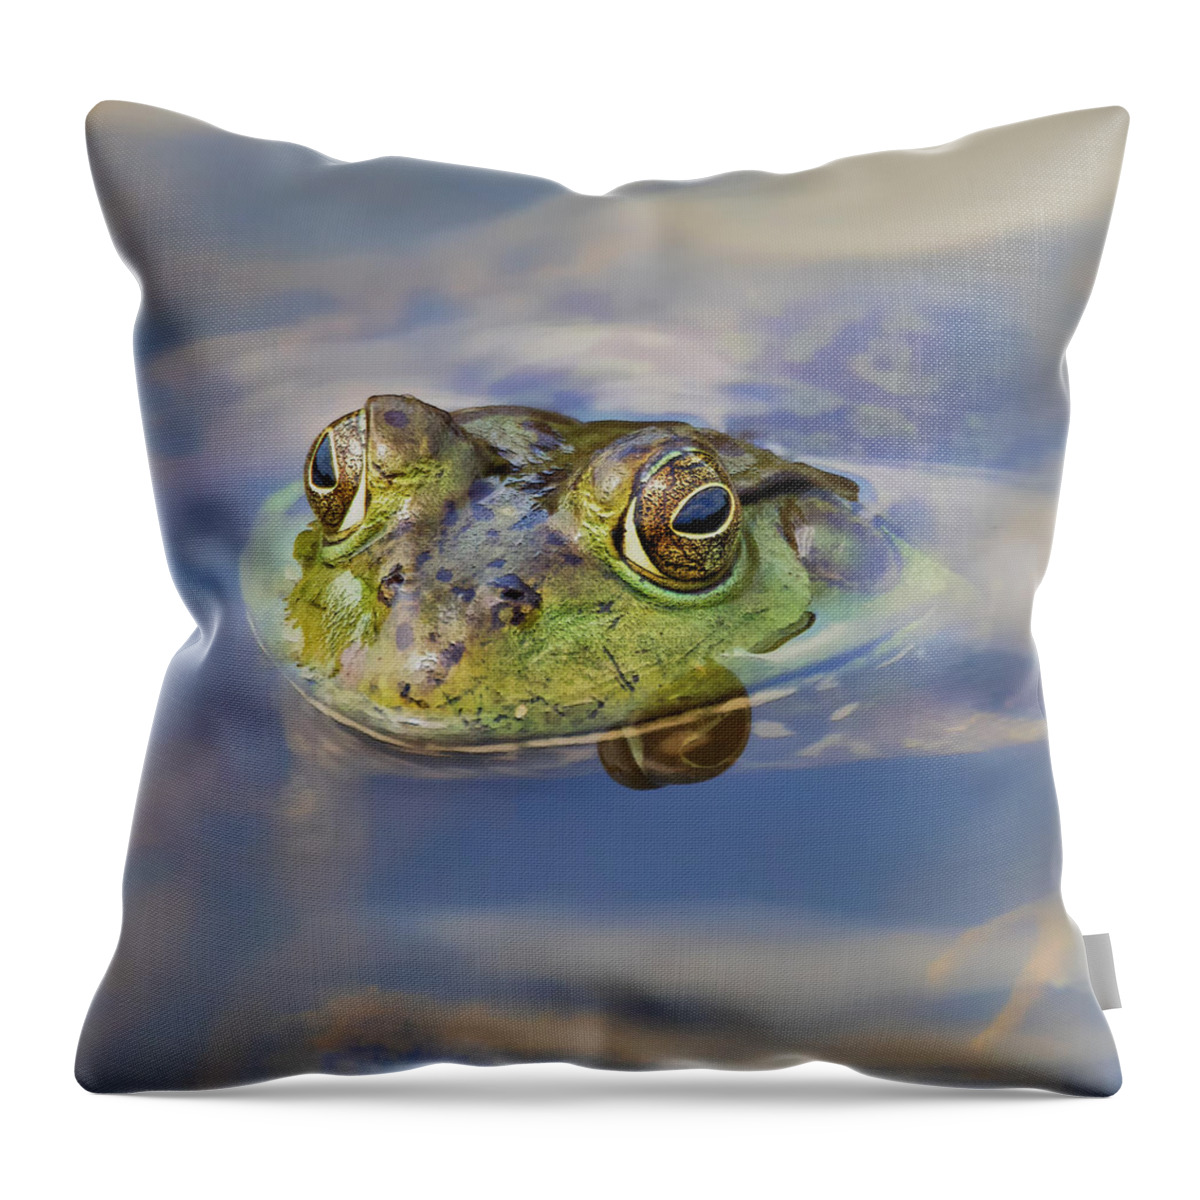 Amphibian Throw Pillow featuring the photograph Kermie by Bill and Linda Tiepelman